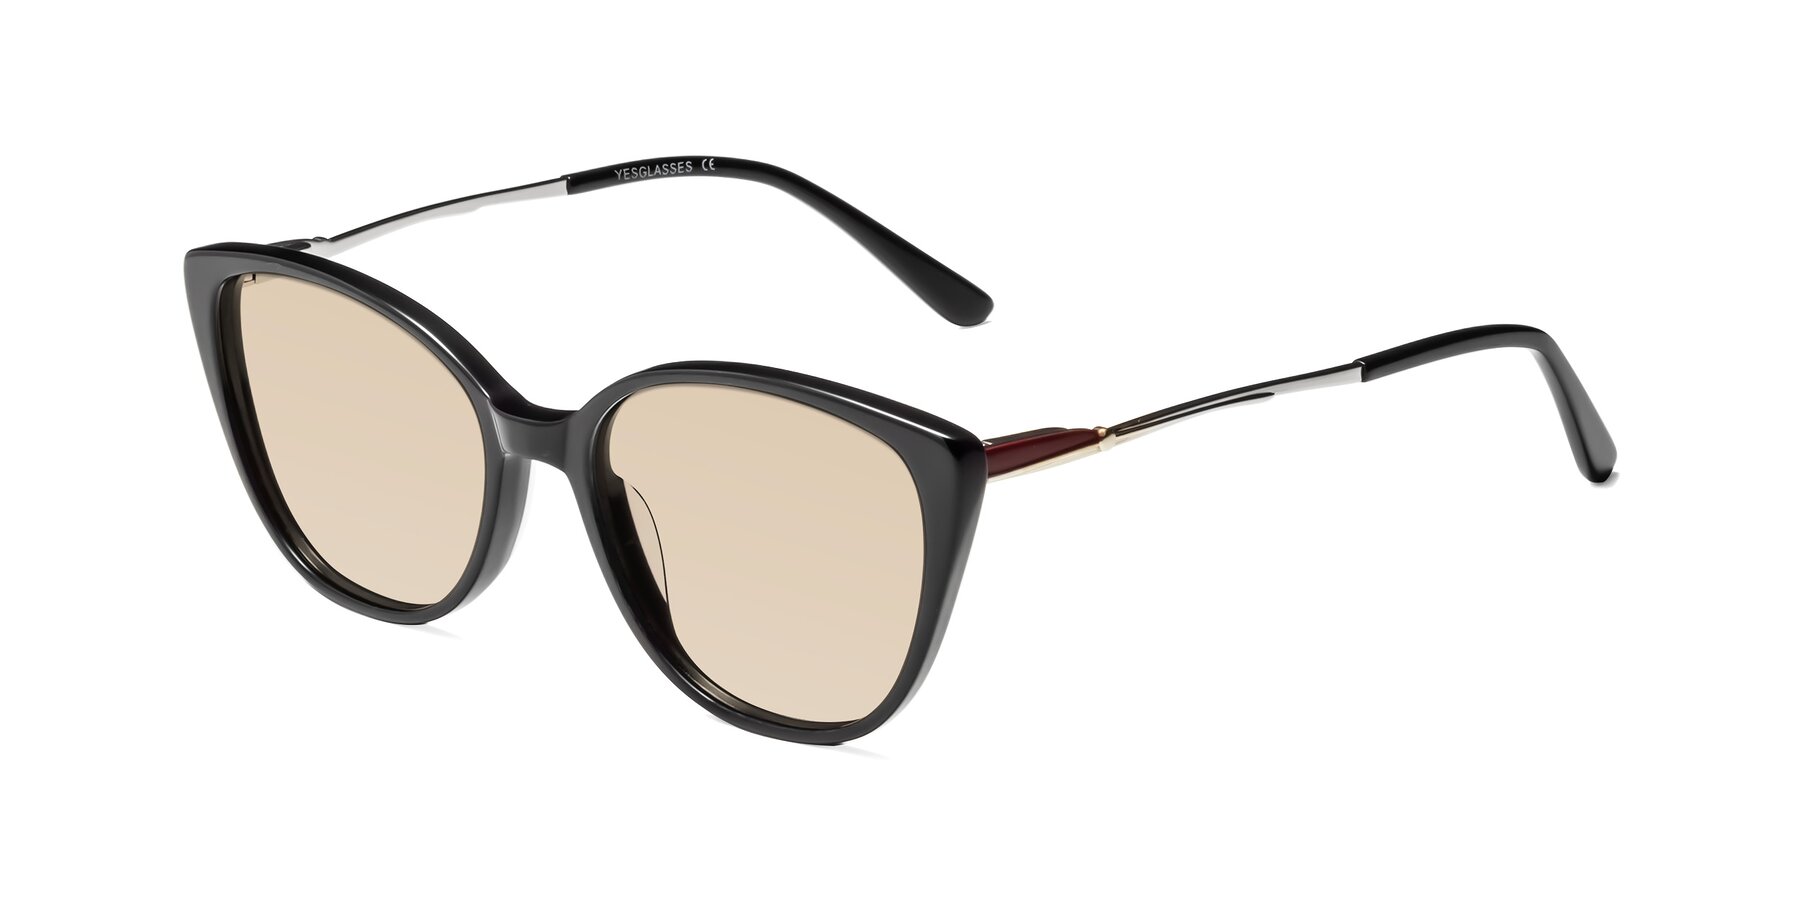 Angle of 17424 in Black with Light Brown Tinted Lenses